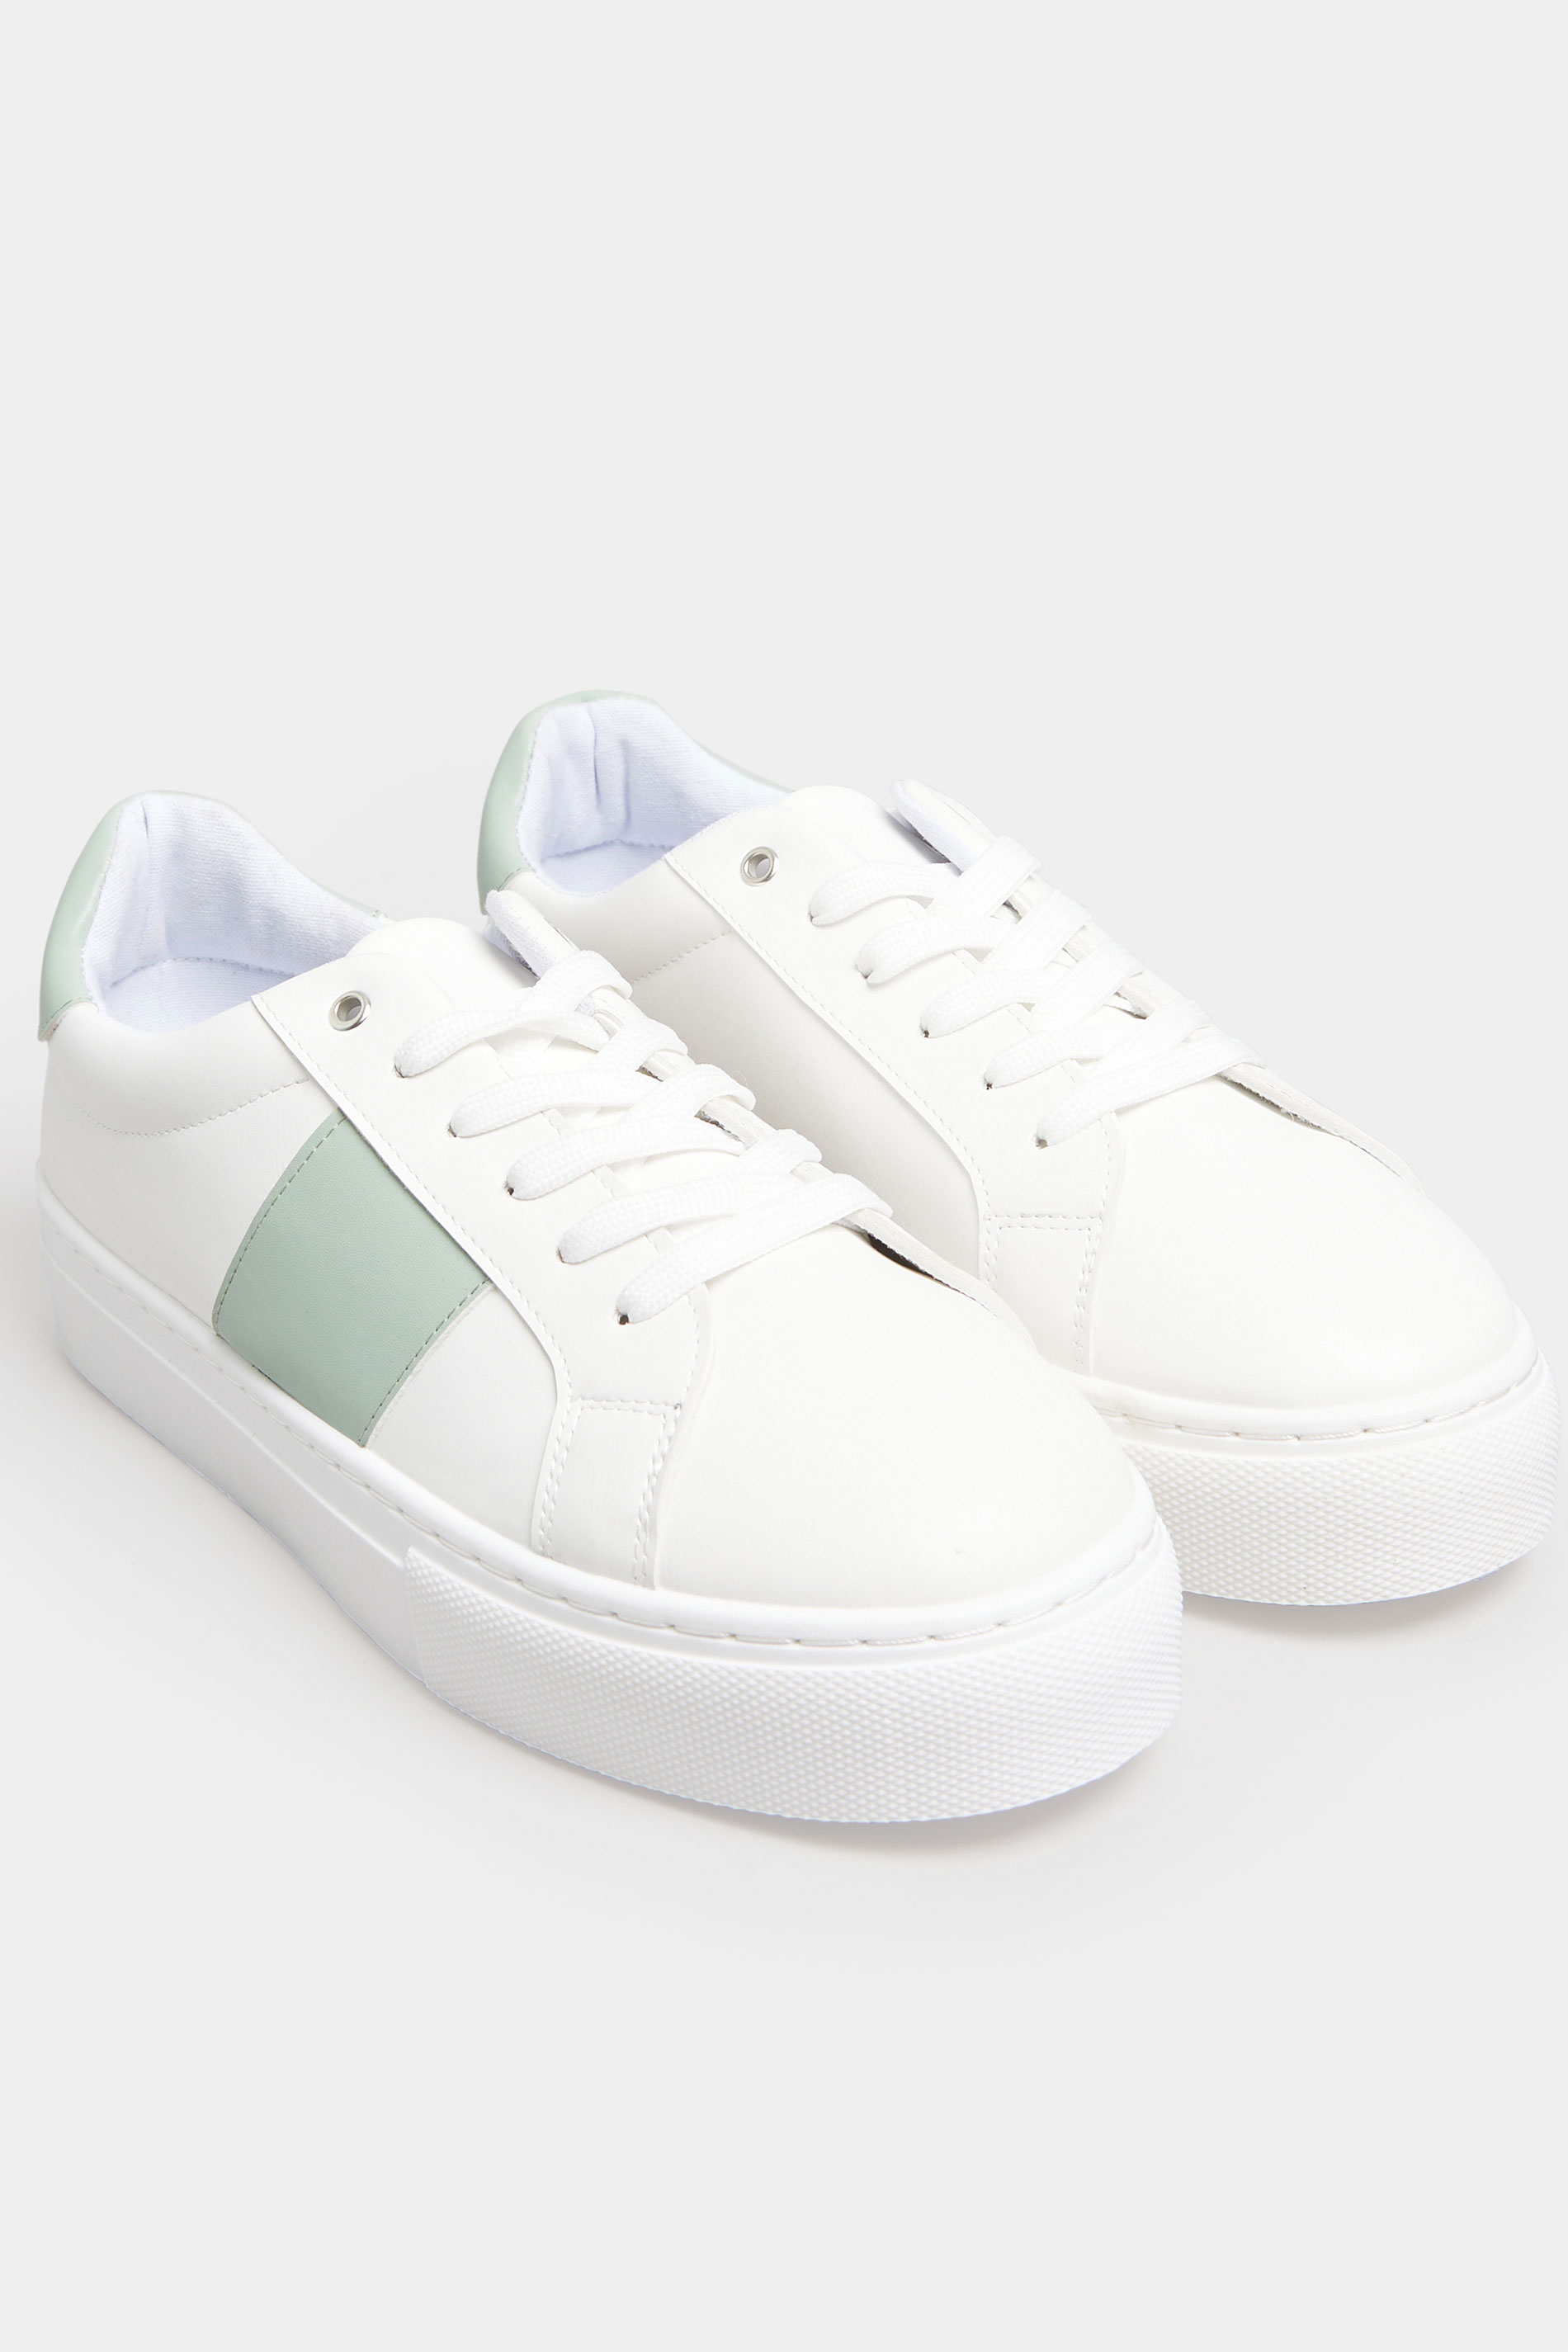 LIMITED COLLECTION Plus Size White & Mint Green Stripe Trainers In Wide EEE Fit | Yours Clothing  3